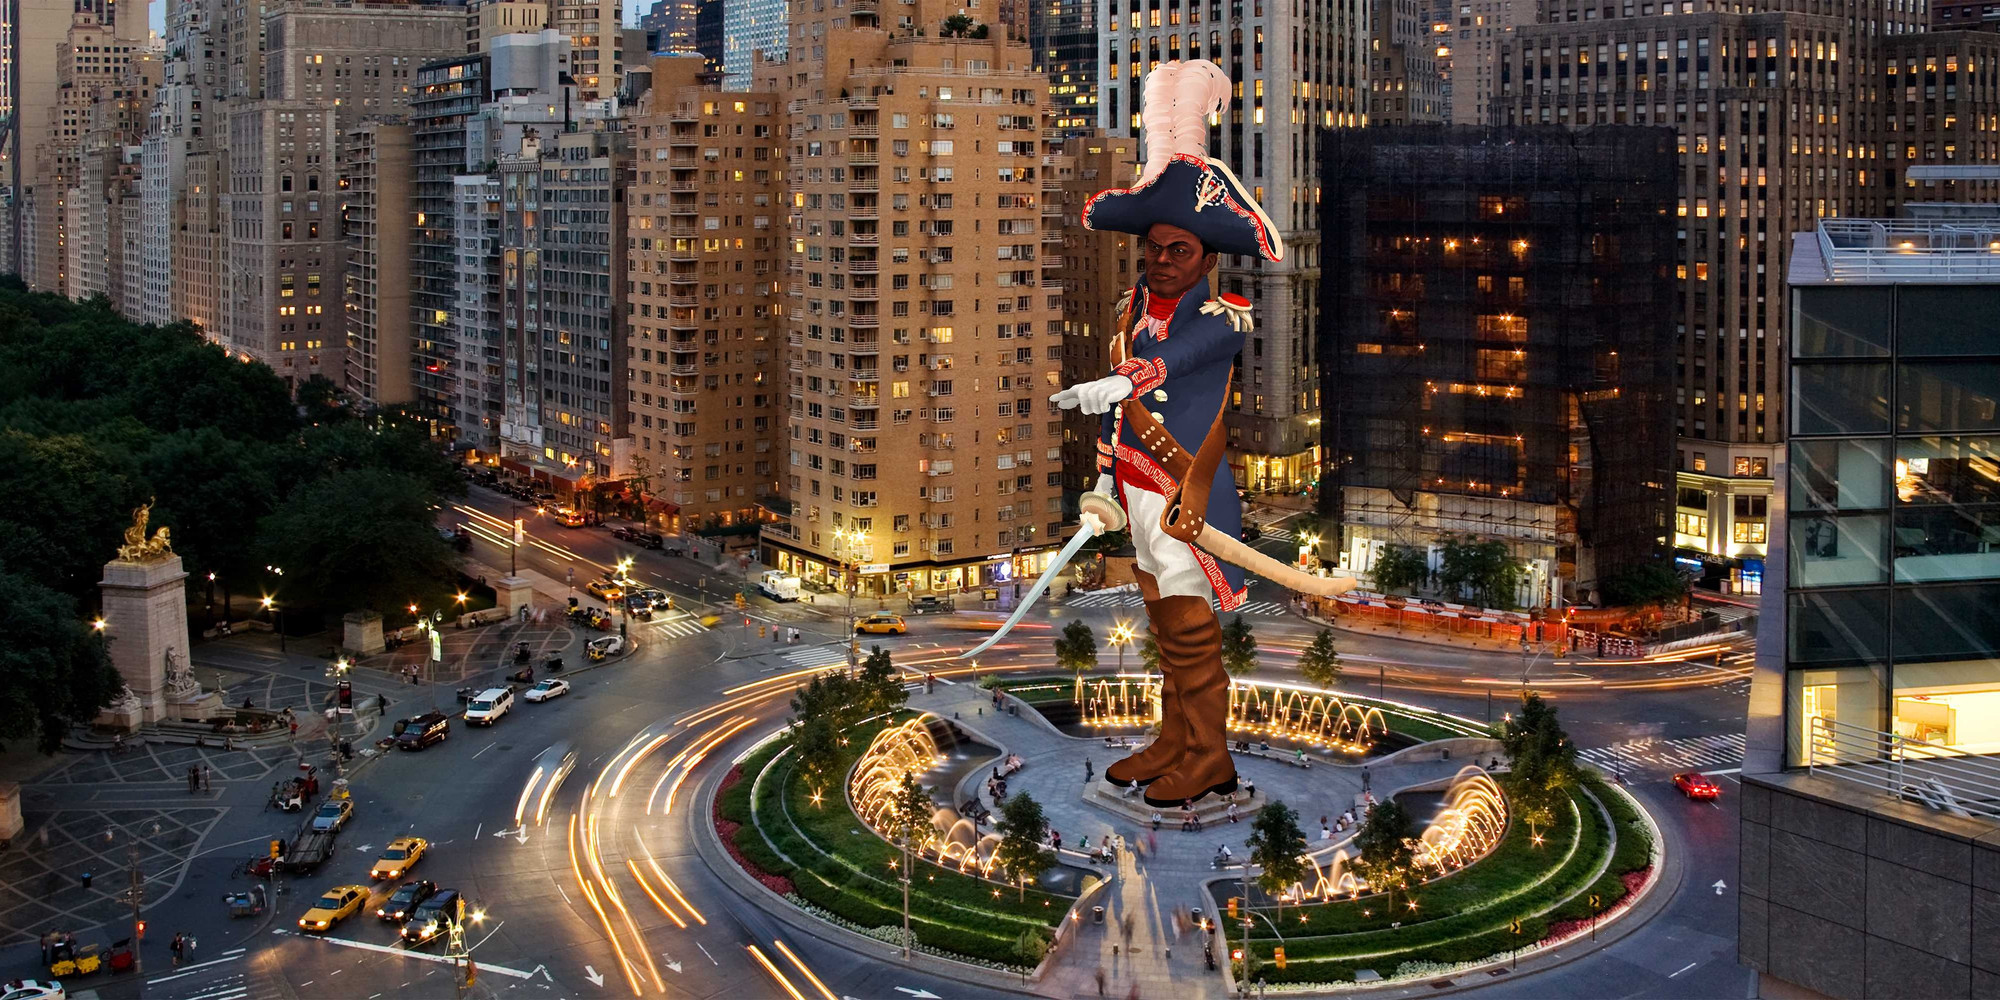 Kinfolk. The Monuments Project. 2022. Proposal for an augmented-reality monument in honor of General Toussaint Louverture on Columbus Circle. Courtesy Kinfolk